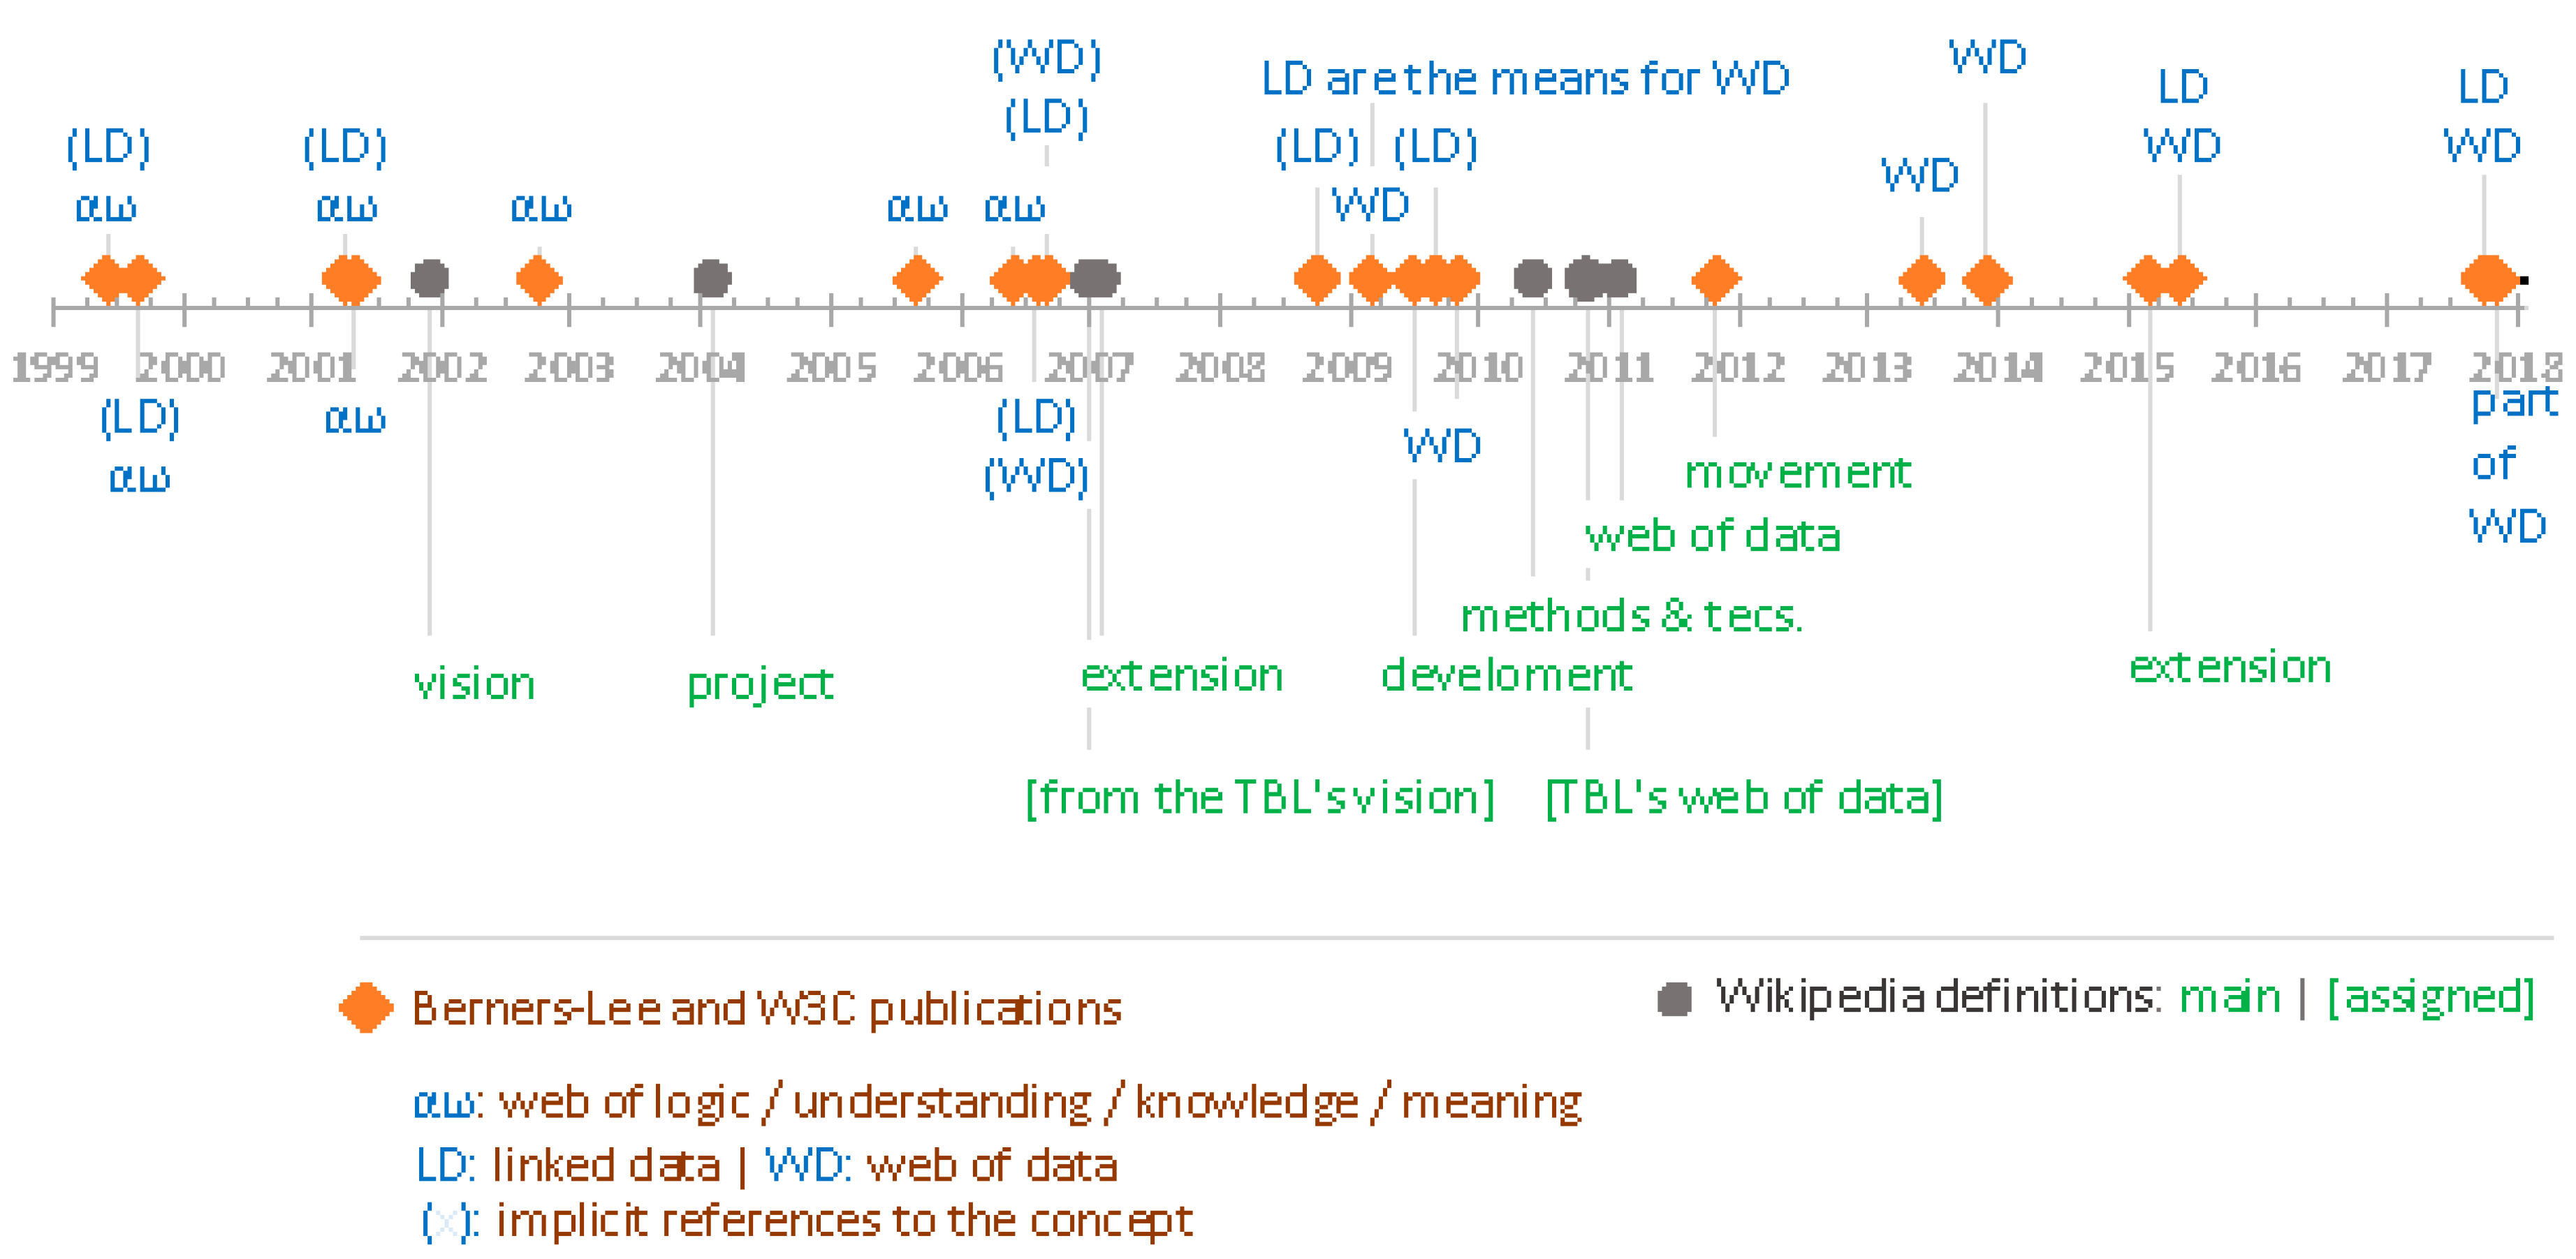 Figure 2. Comparative temporal distribution between the definitions of semantic web from the two sources (Wikipedia and publications of Berners-Lee/ World Wide Web Consortium (W3C)).